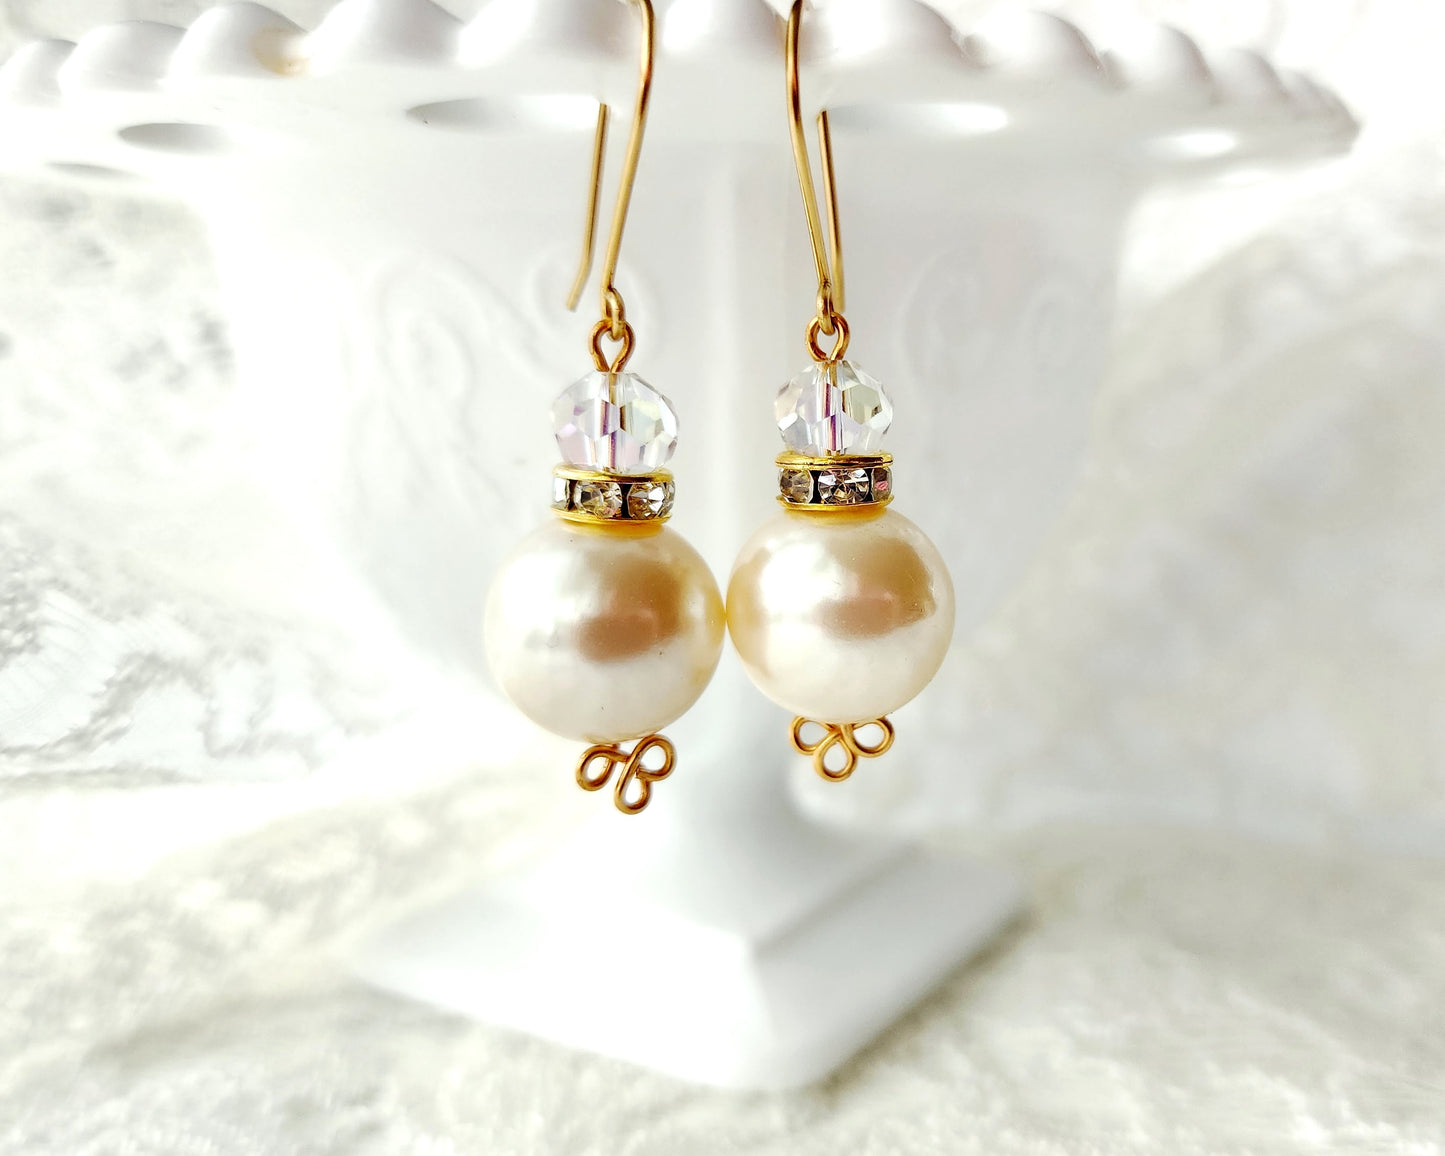 Vintage Pearl Crystal Celtic Earrings, Large cream color pearls with sparkly clear faceted crystal and Celtic Trinity knot design on the base of the pearls. Long French style earring wires. 